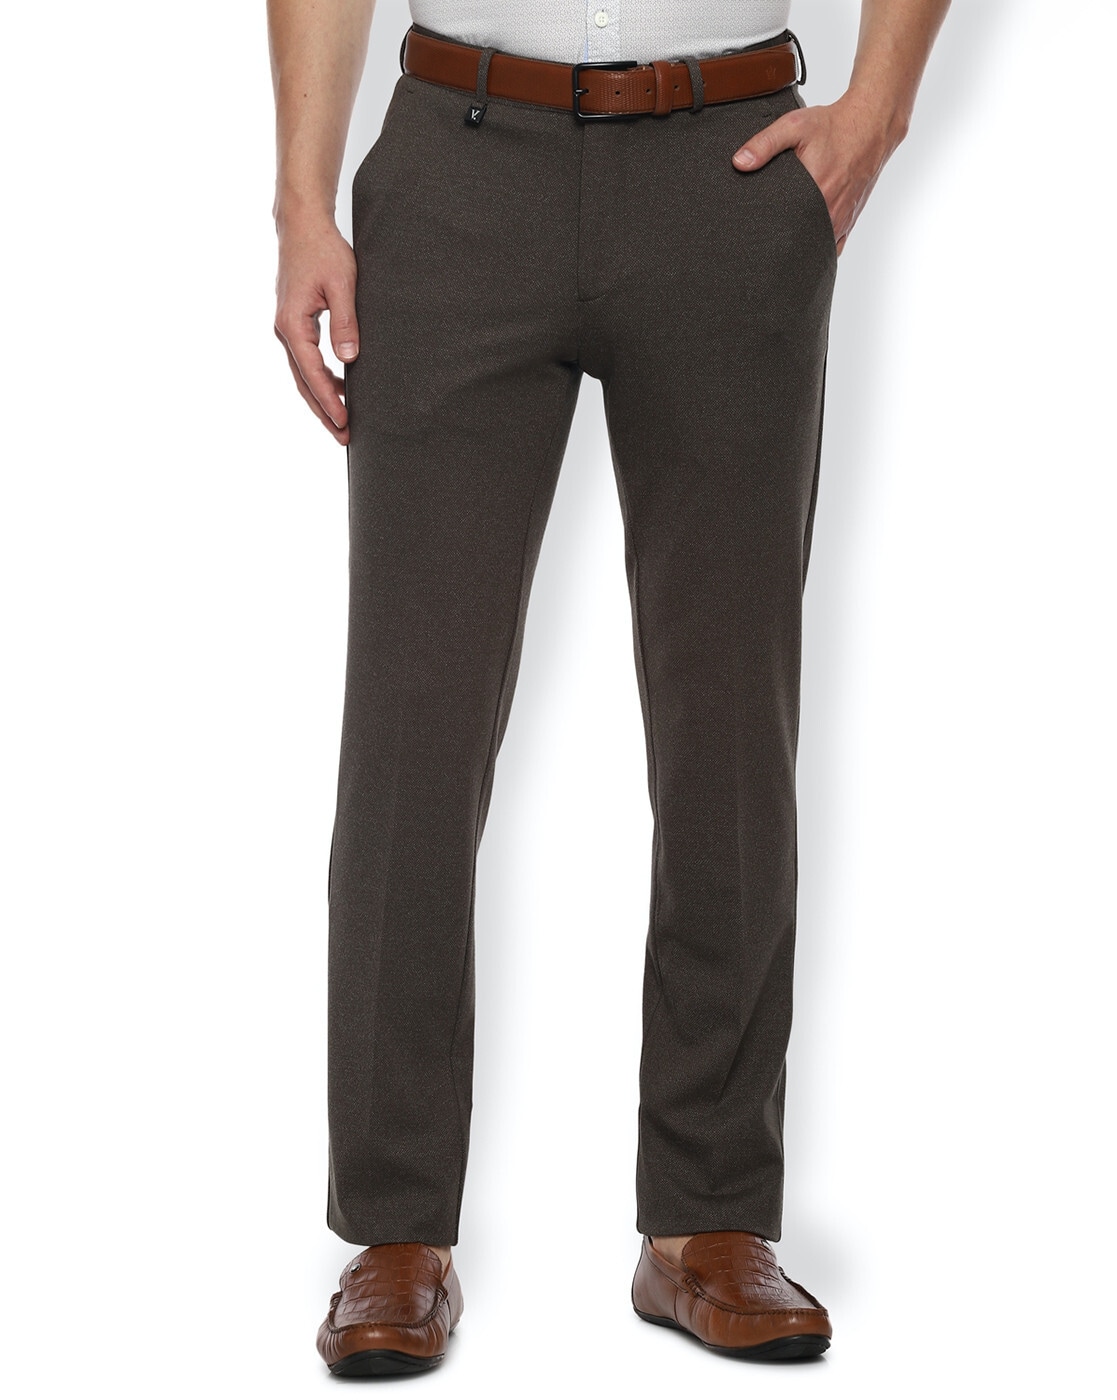 Buy Grey Trousers & Pants for Men by LOUIS PHILIPPE Online | Ajio.com